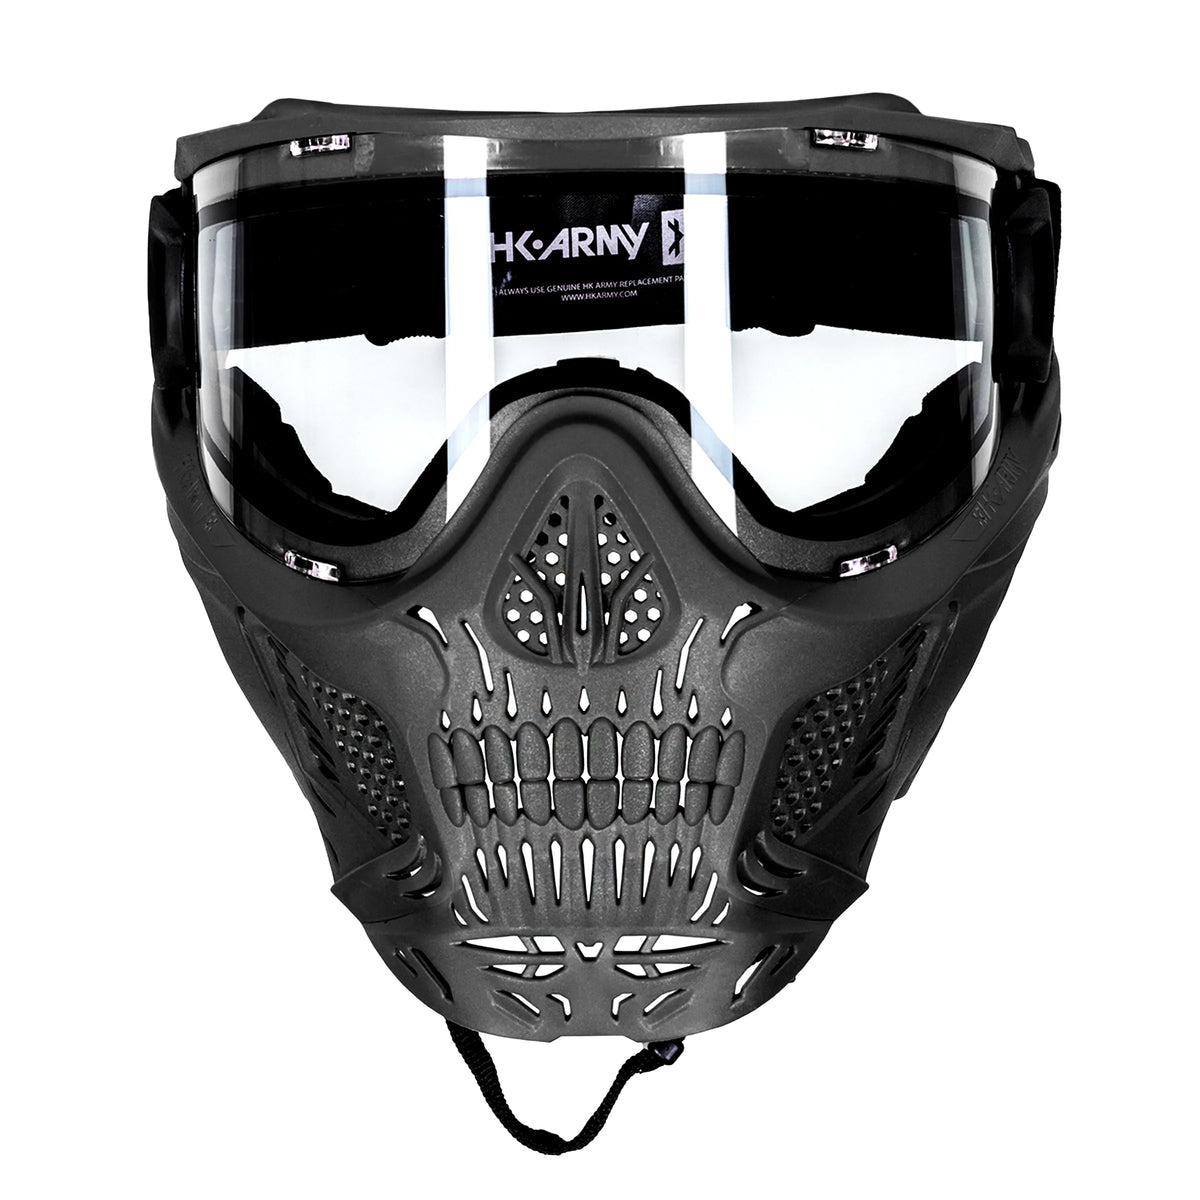 Hstl Skull Goggle - Black W/ Clear Lens | Paintball Goggle | Mask | Hk Army